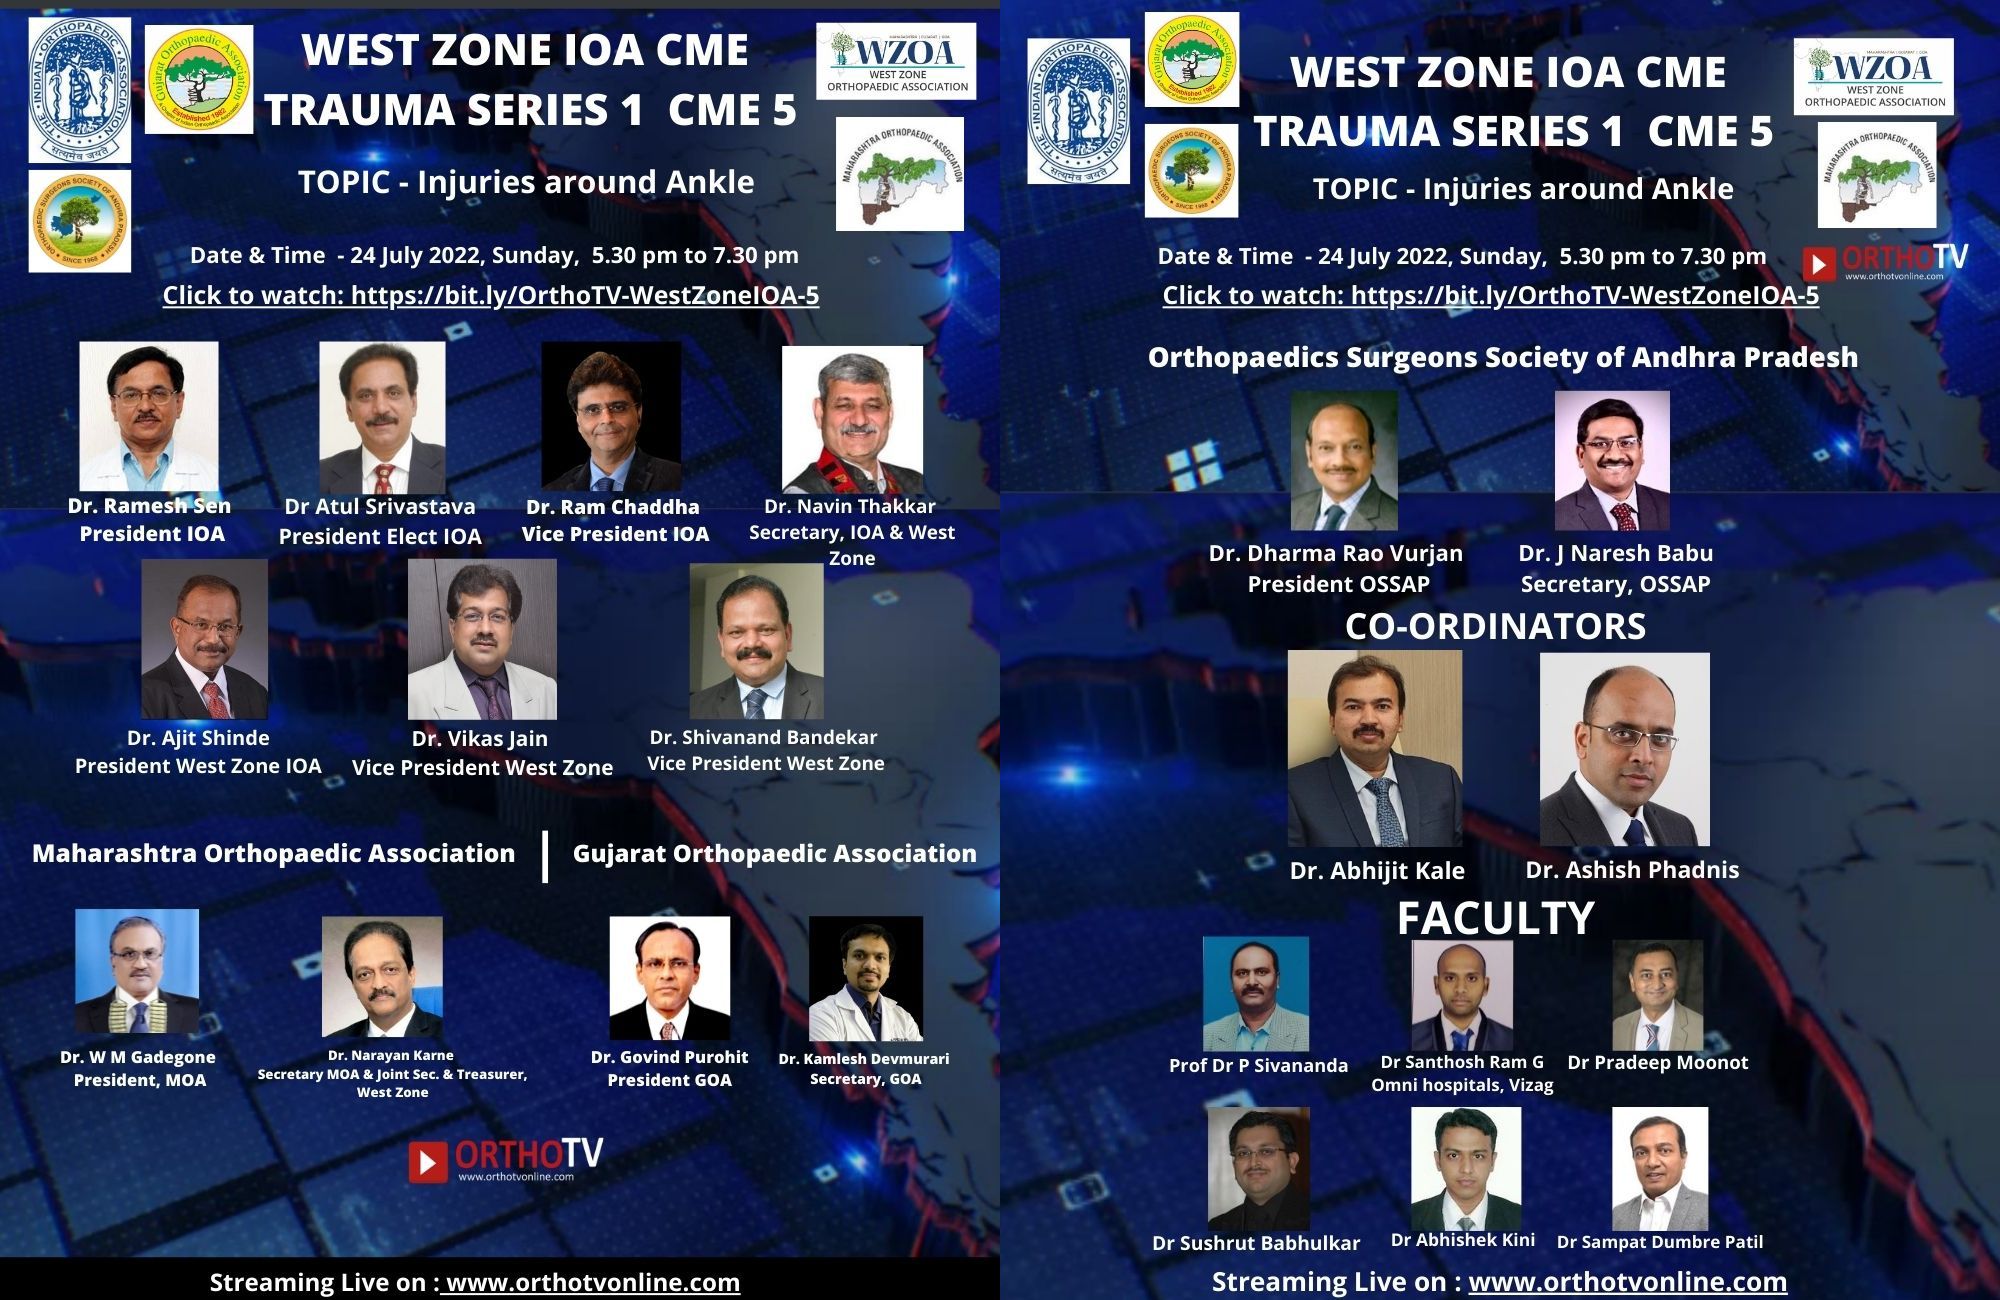 WEST ZONE IOA CME TRAUMA SERIES 1 CME 5 - Injuries around Ankle